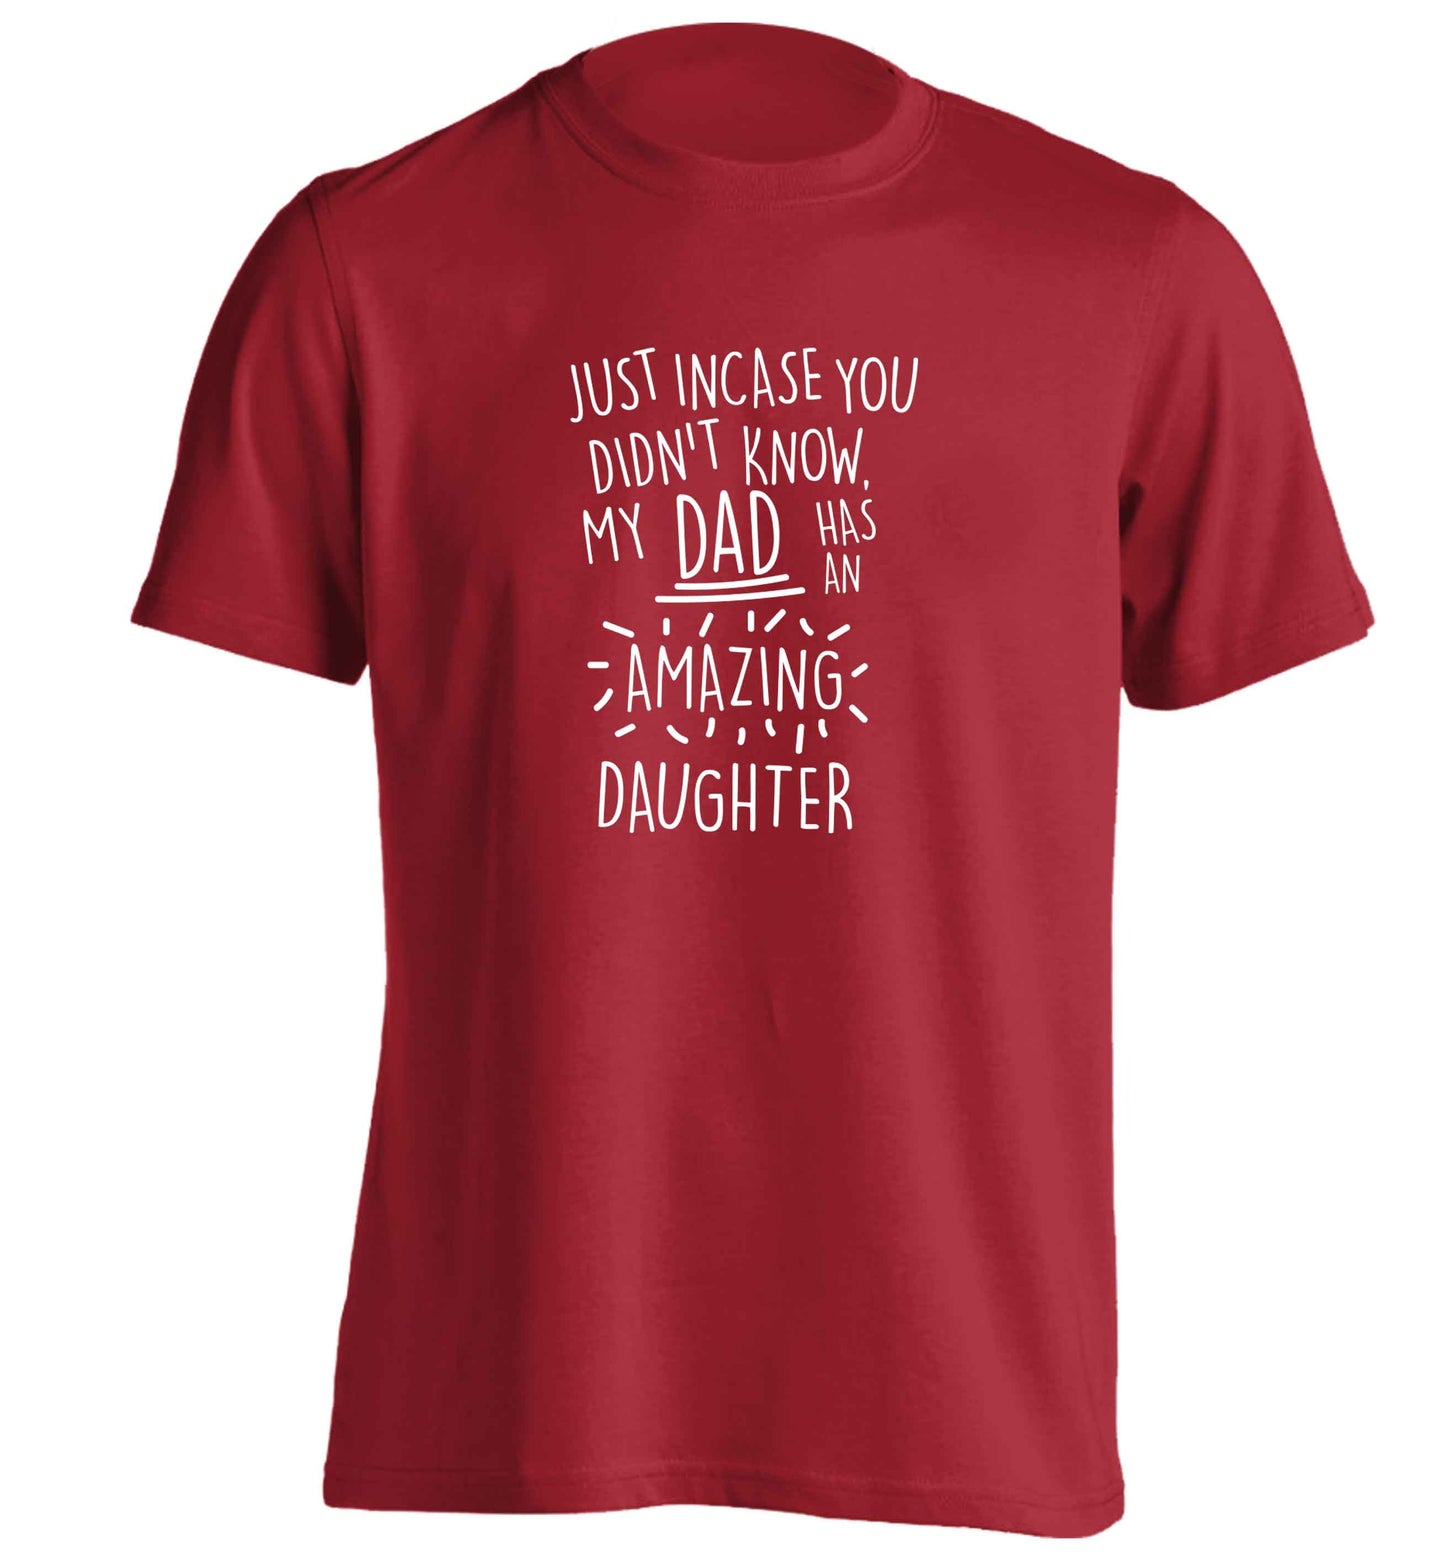 Just incase you didn't know my dad has an amazing daughter adults unisex red Tshirt 2XL